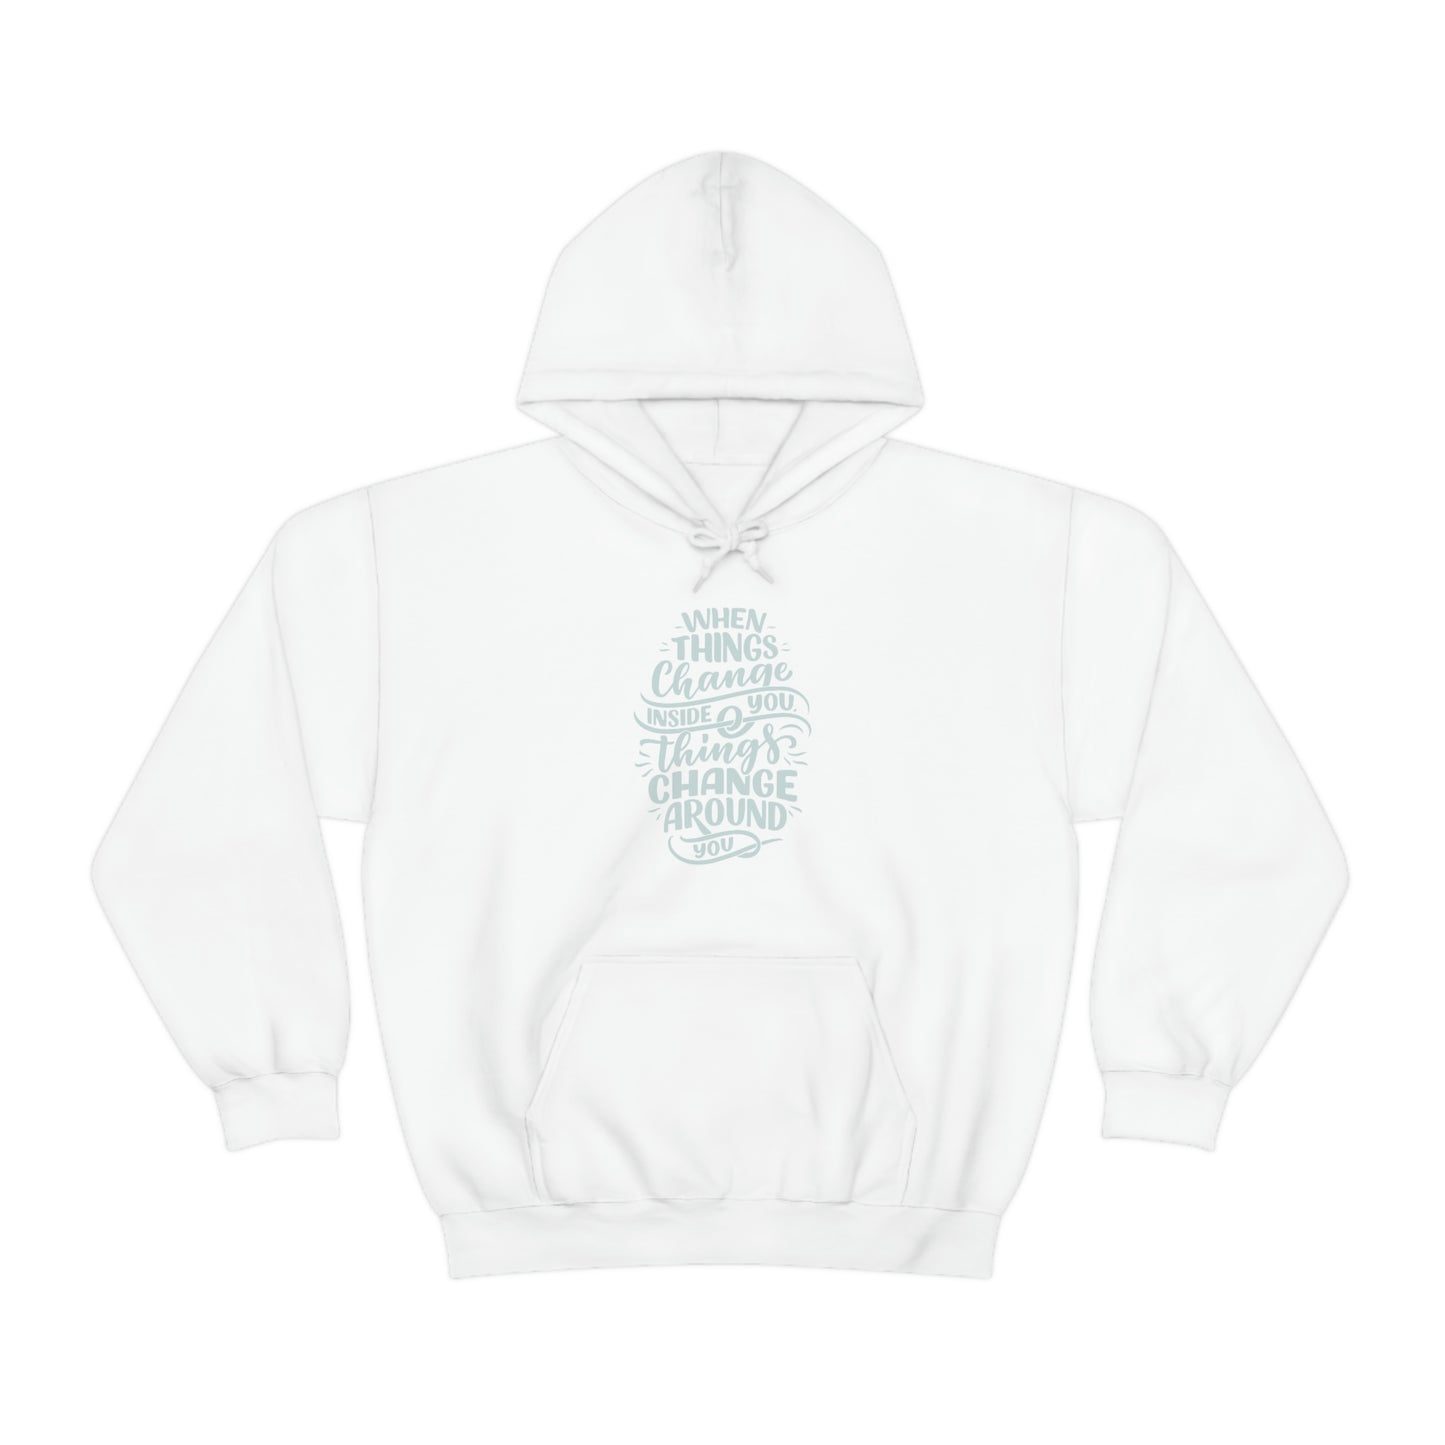 ‘When Things Change inside you, Things Change Around you’ Printed Front & Back.  Unisex Heavy Blend™ Hooded Sweatshirt